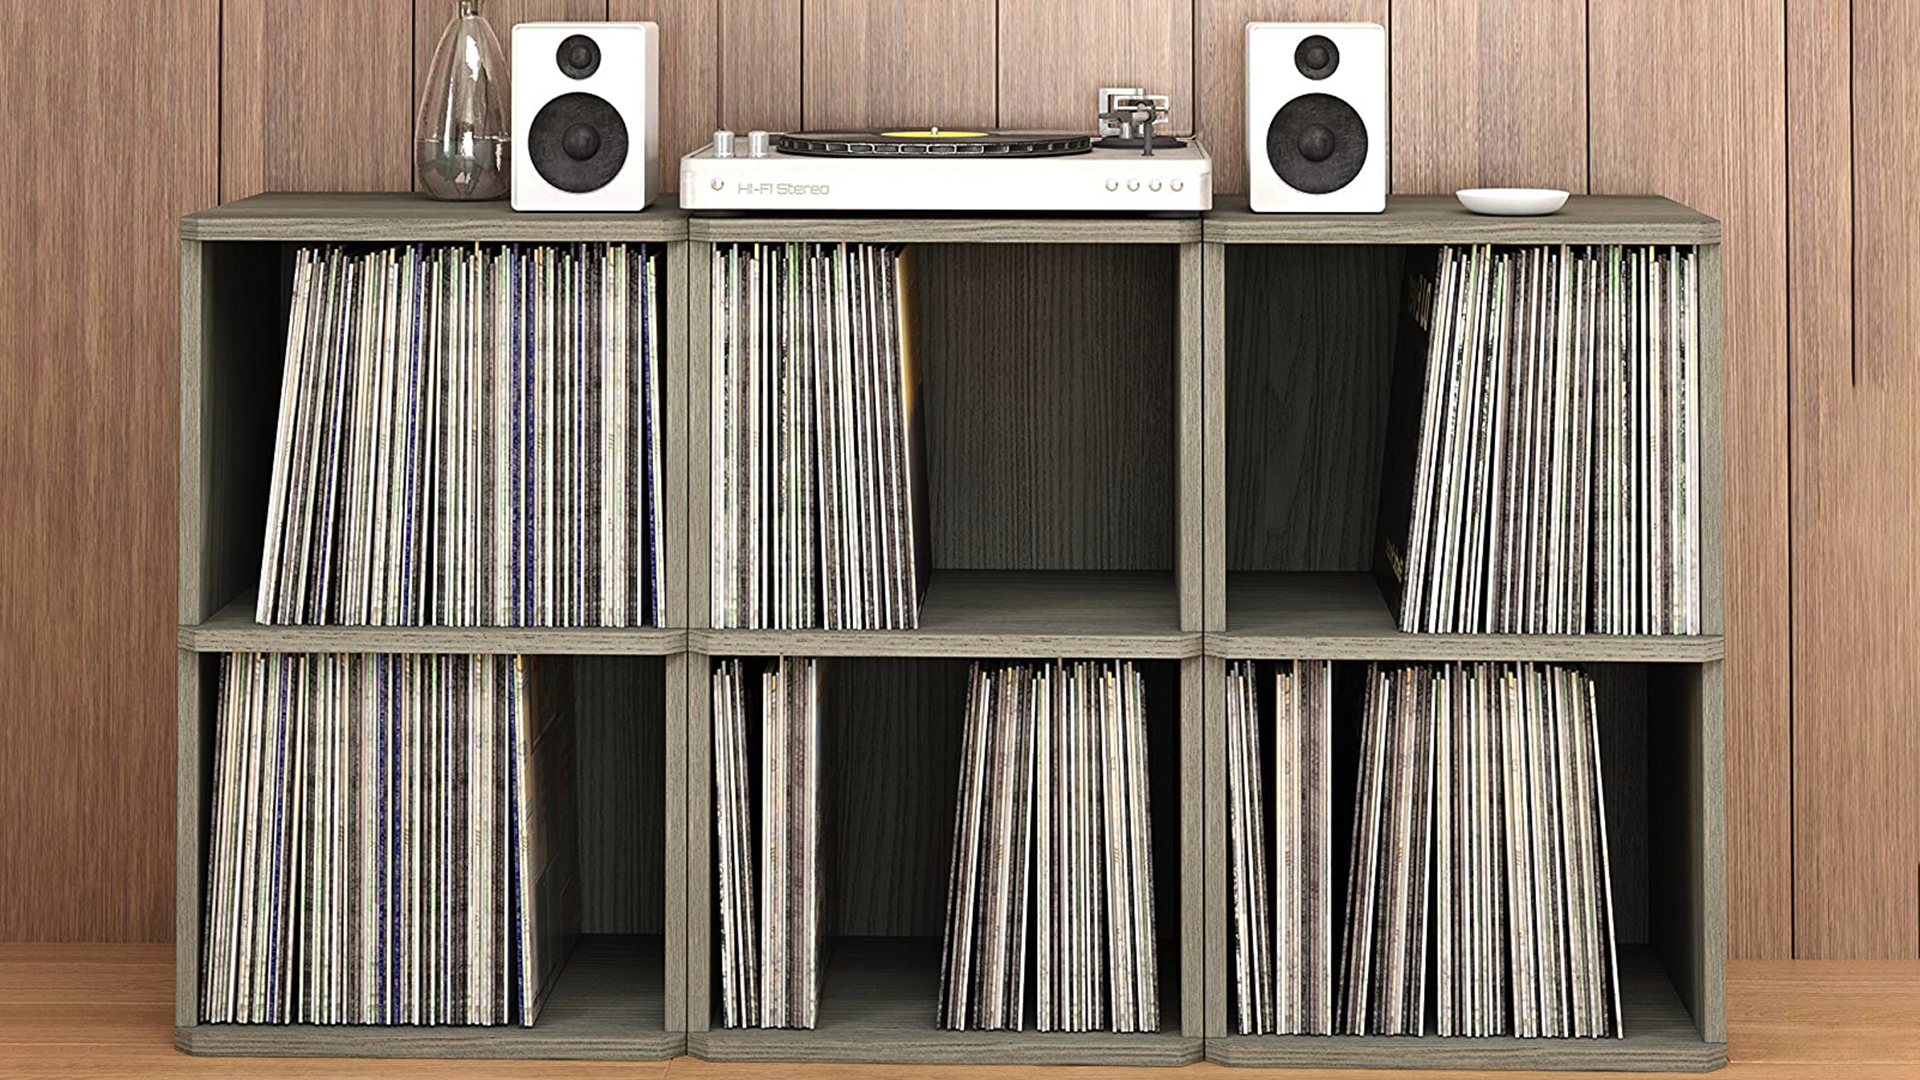 A two-shelf vinyl record storage organizer with a record player and monitors on top.